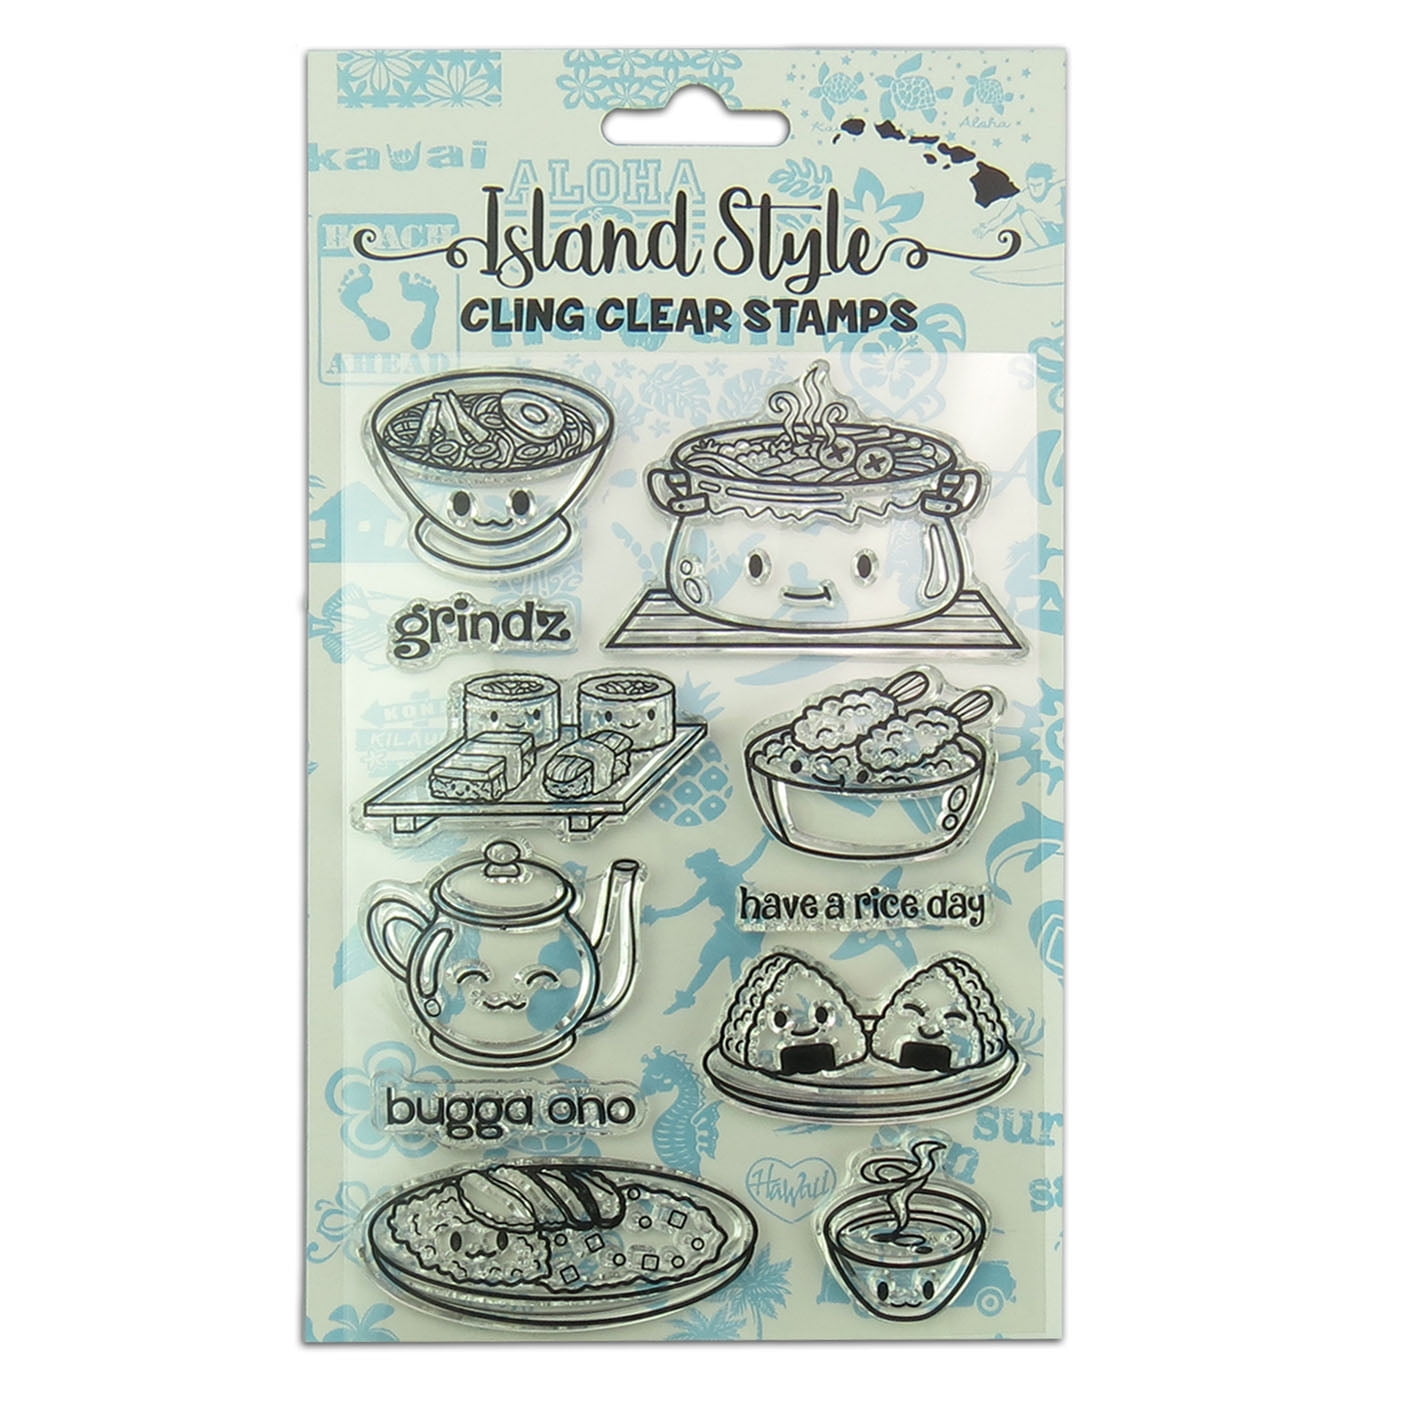 92pcs Cake Coffee Afternoon Tea Paper Stickers Kawaii Paper Stickers for Water Cup Stationery DIY Scrapbooking Diary Album Decals